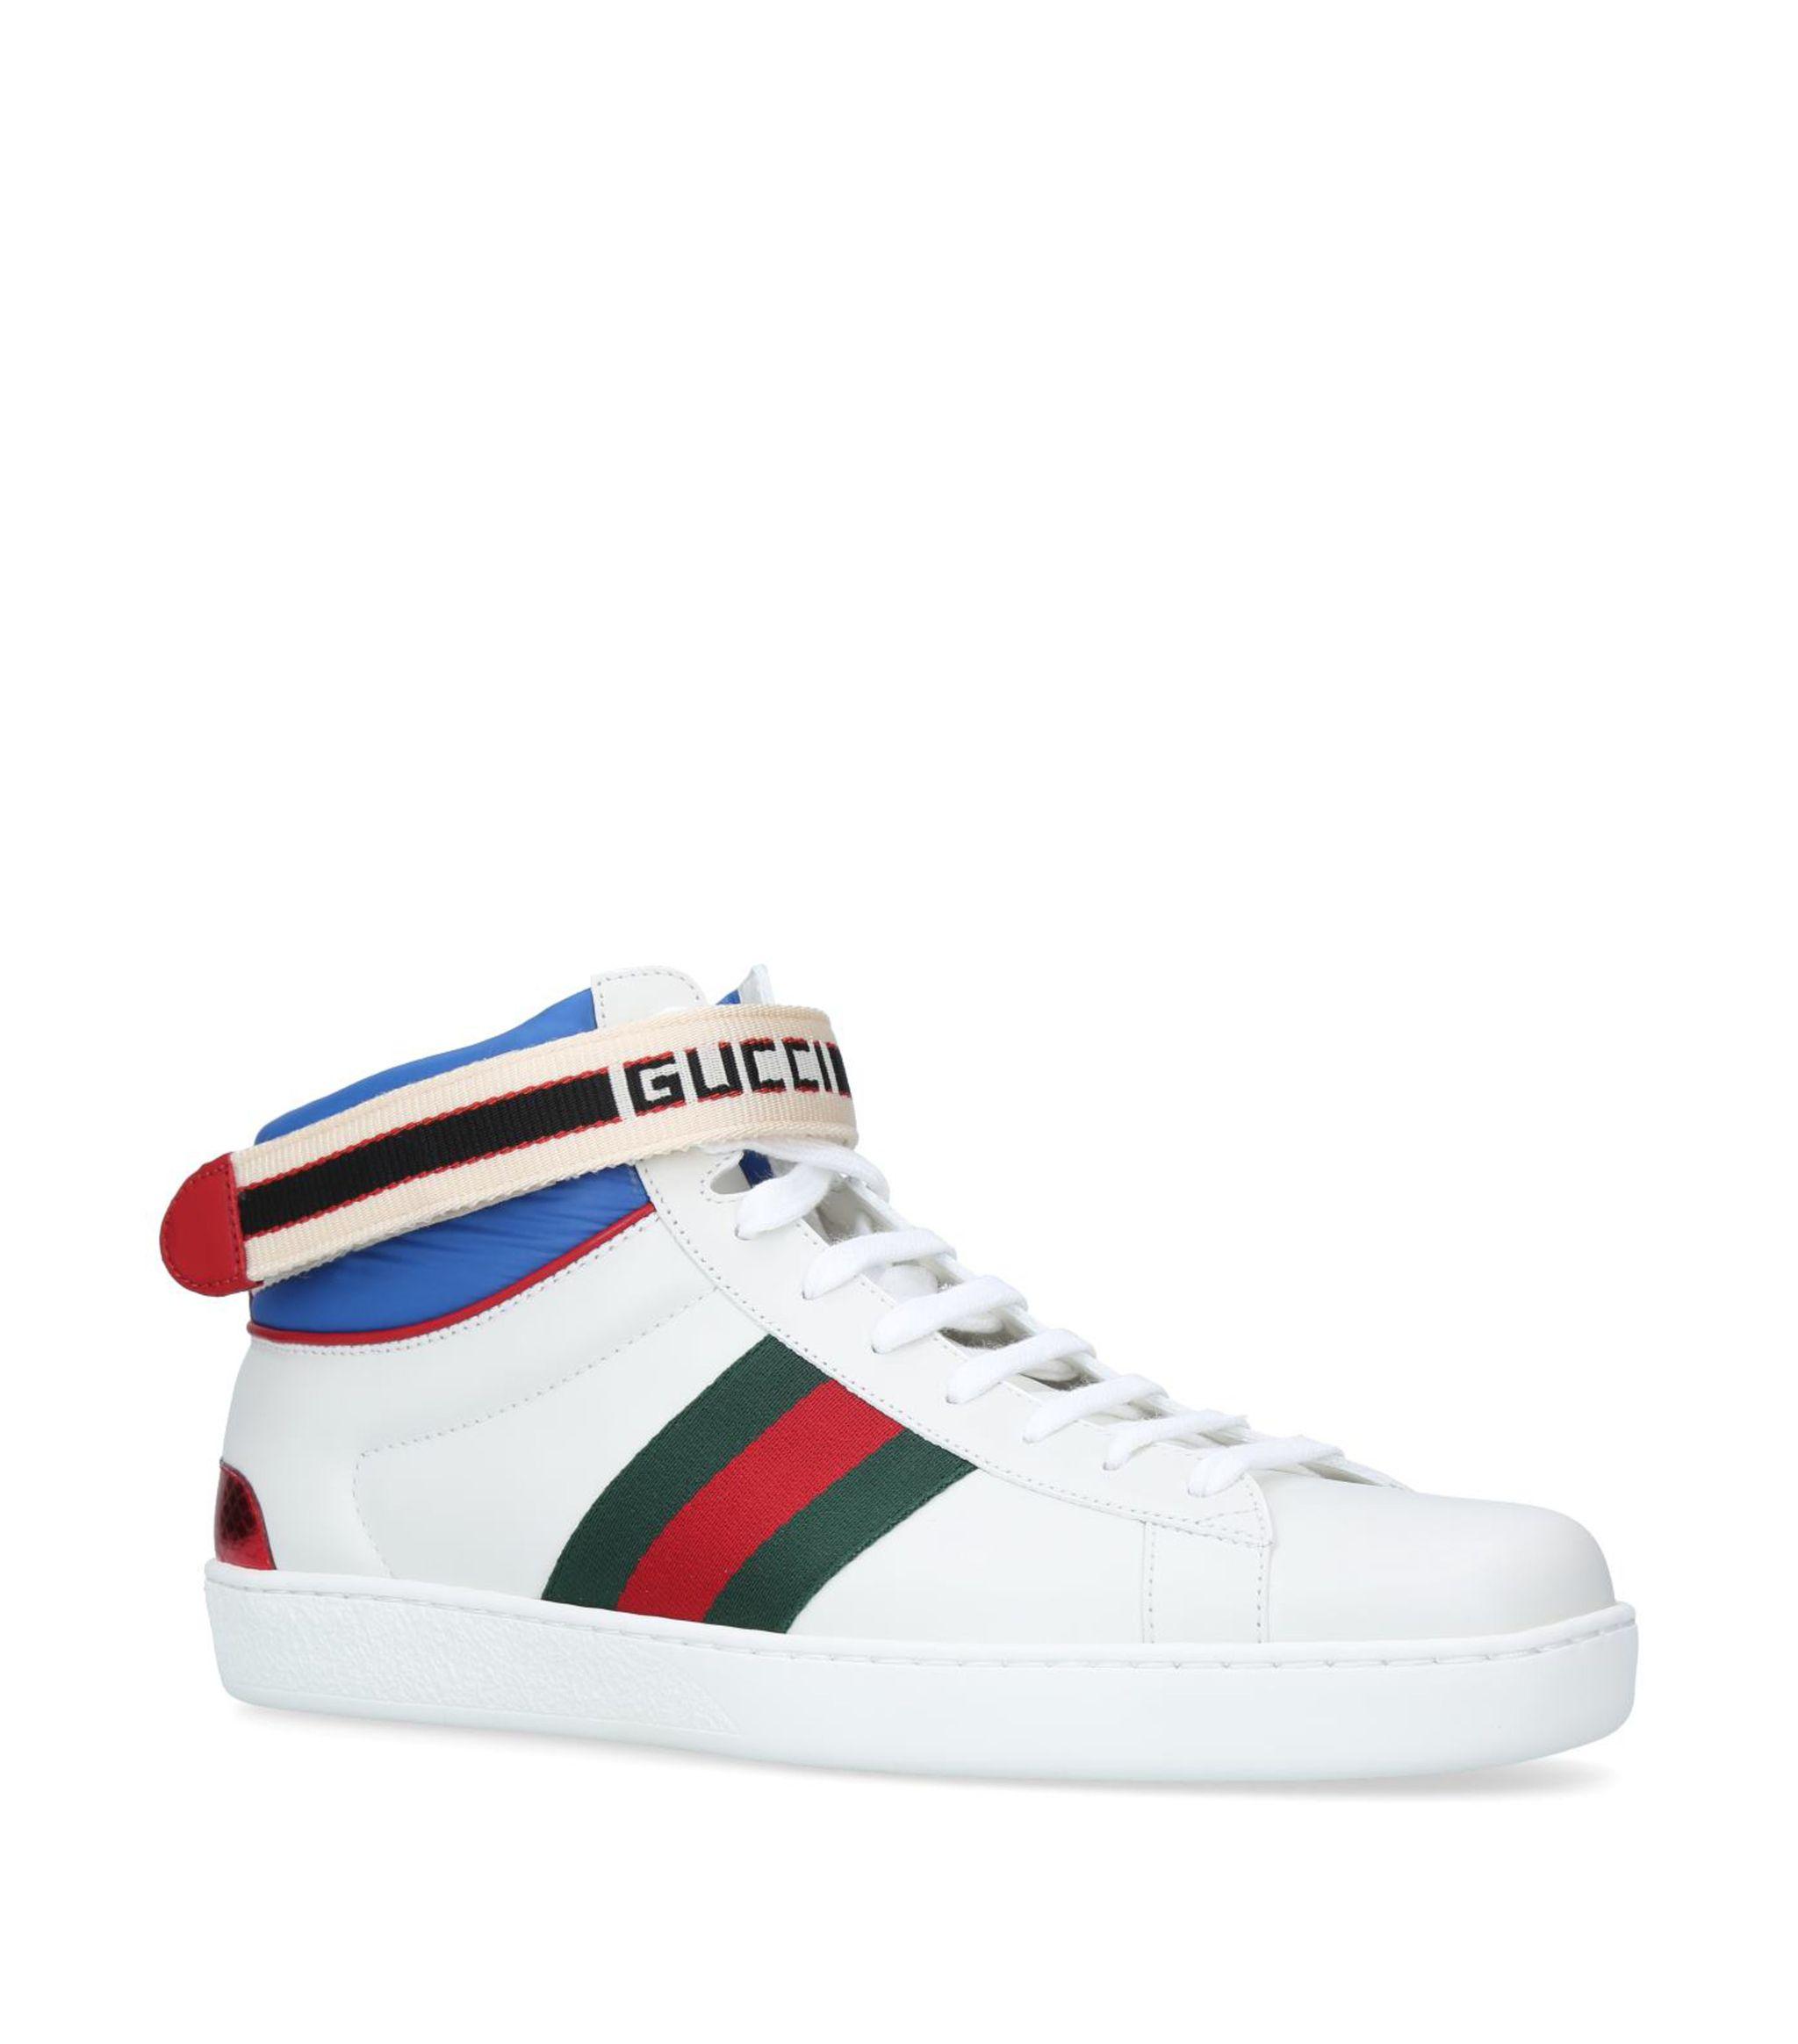 Gucci Leather Ace Stripe High-top Sneaker in White for Men - Lyst